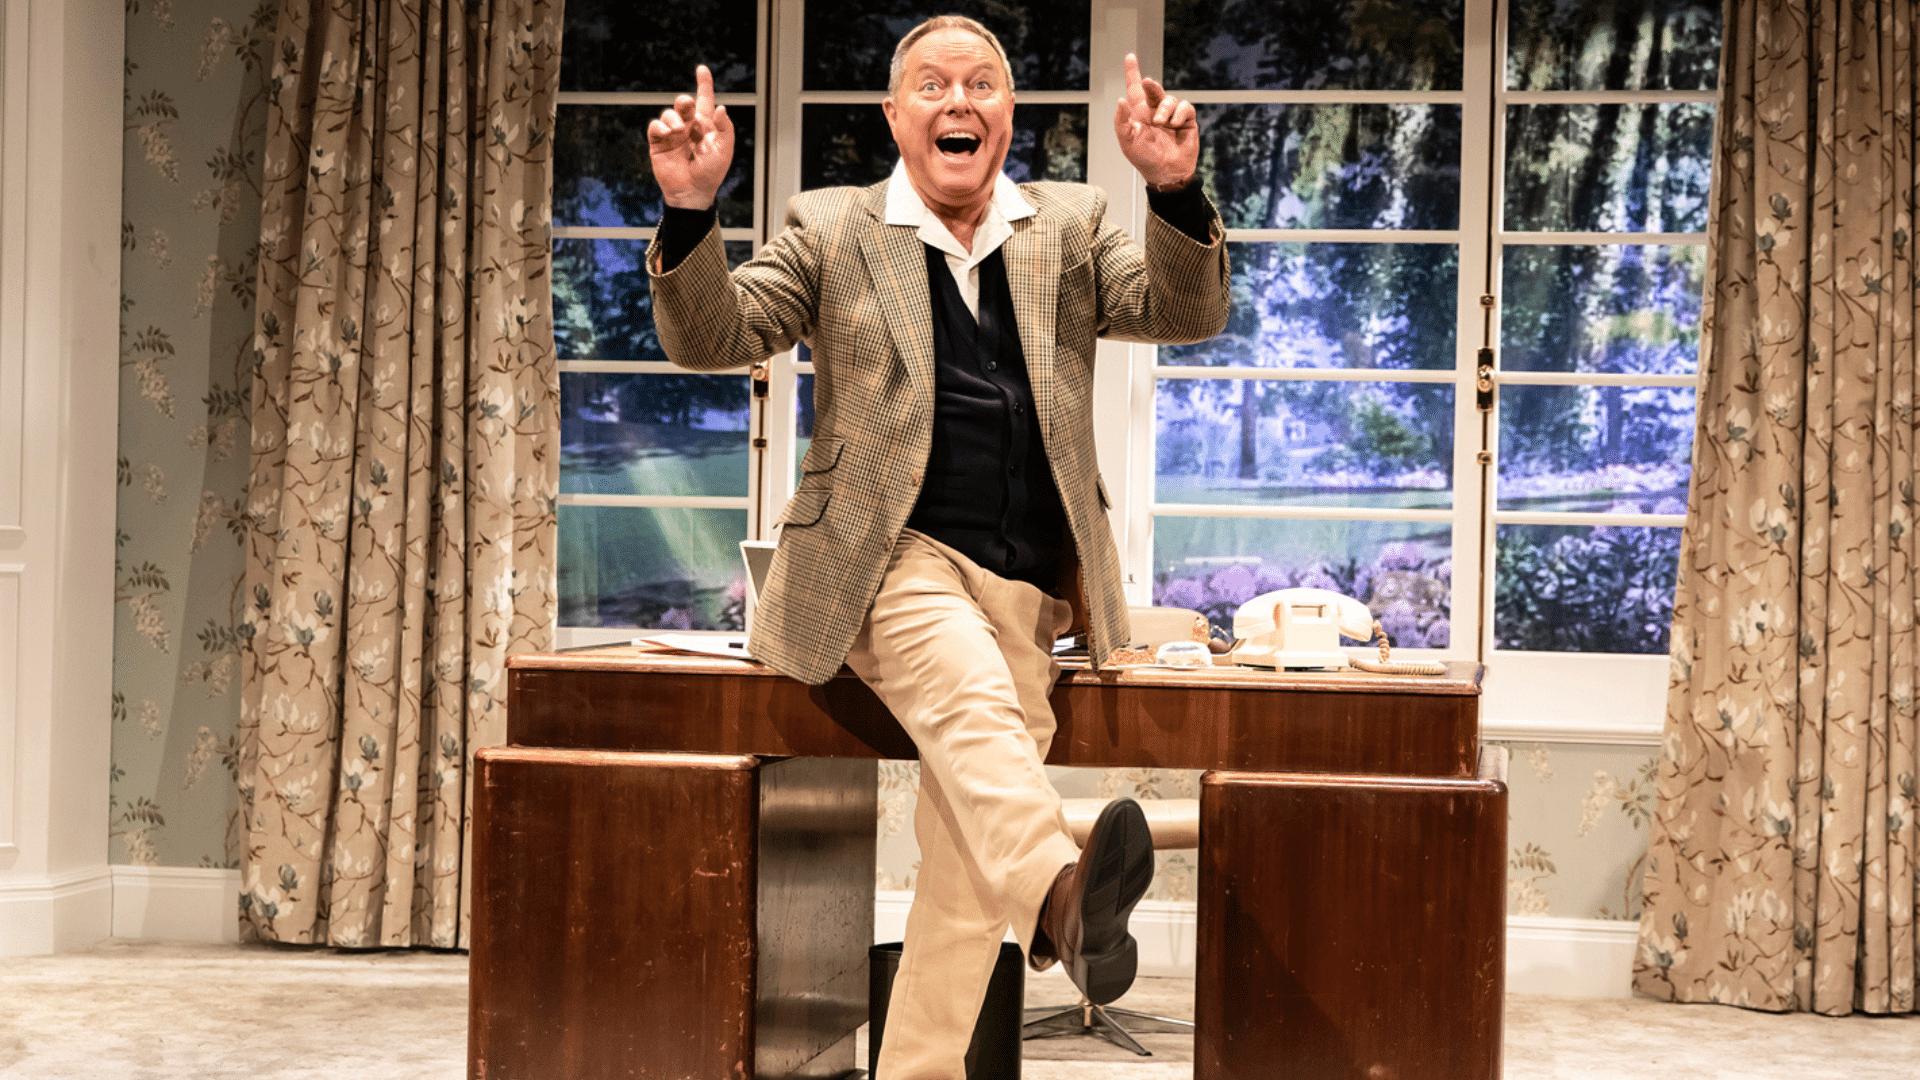 Robert Daws as PG Wodehouse pointing his index fingers in the air and lifting his right leg out in a dancing pose. His mouth is wide open with a happy expression on his face. He is in front of his desk and a window with a nice view of trees, flowers and grounds.